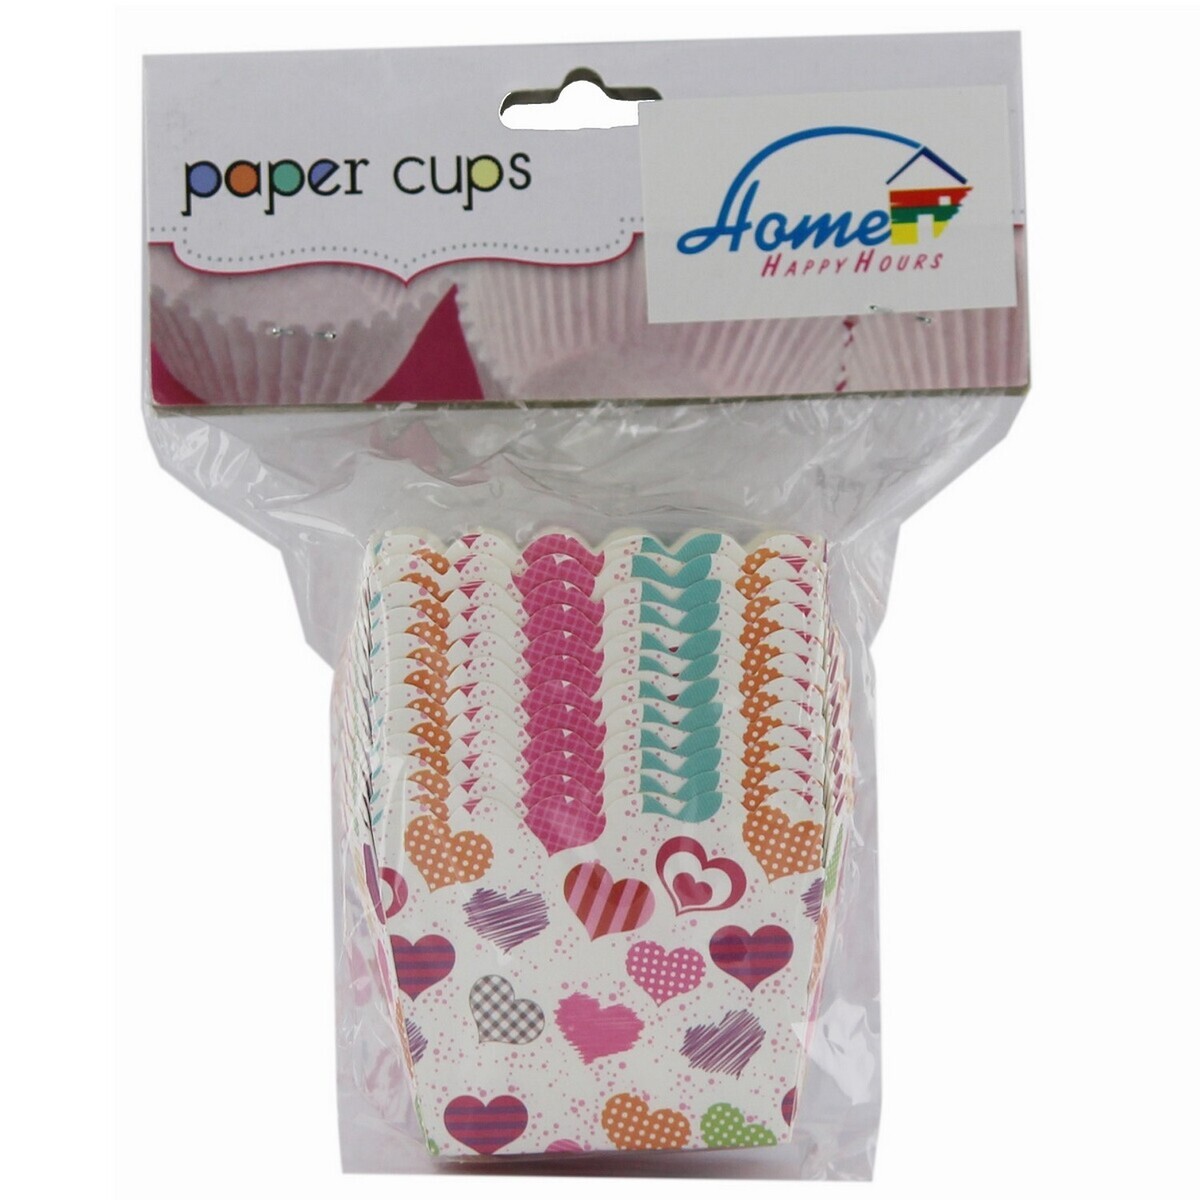 Home Cake Cup 853-7